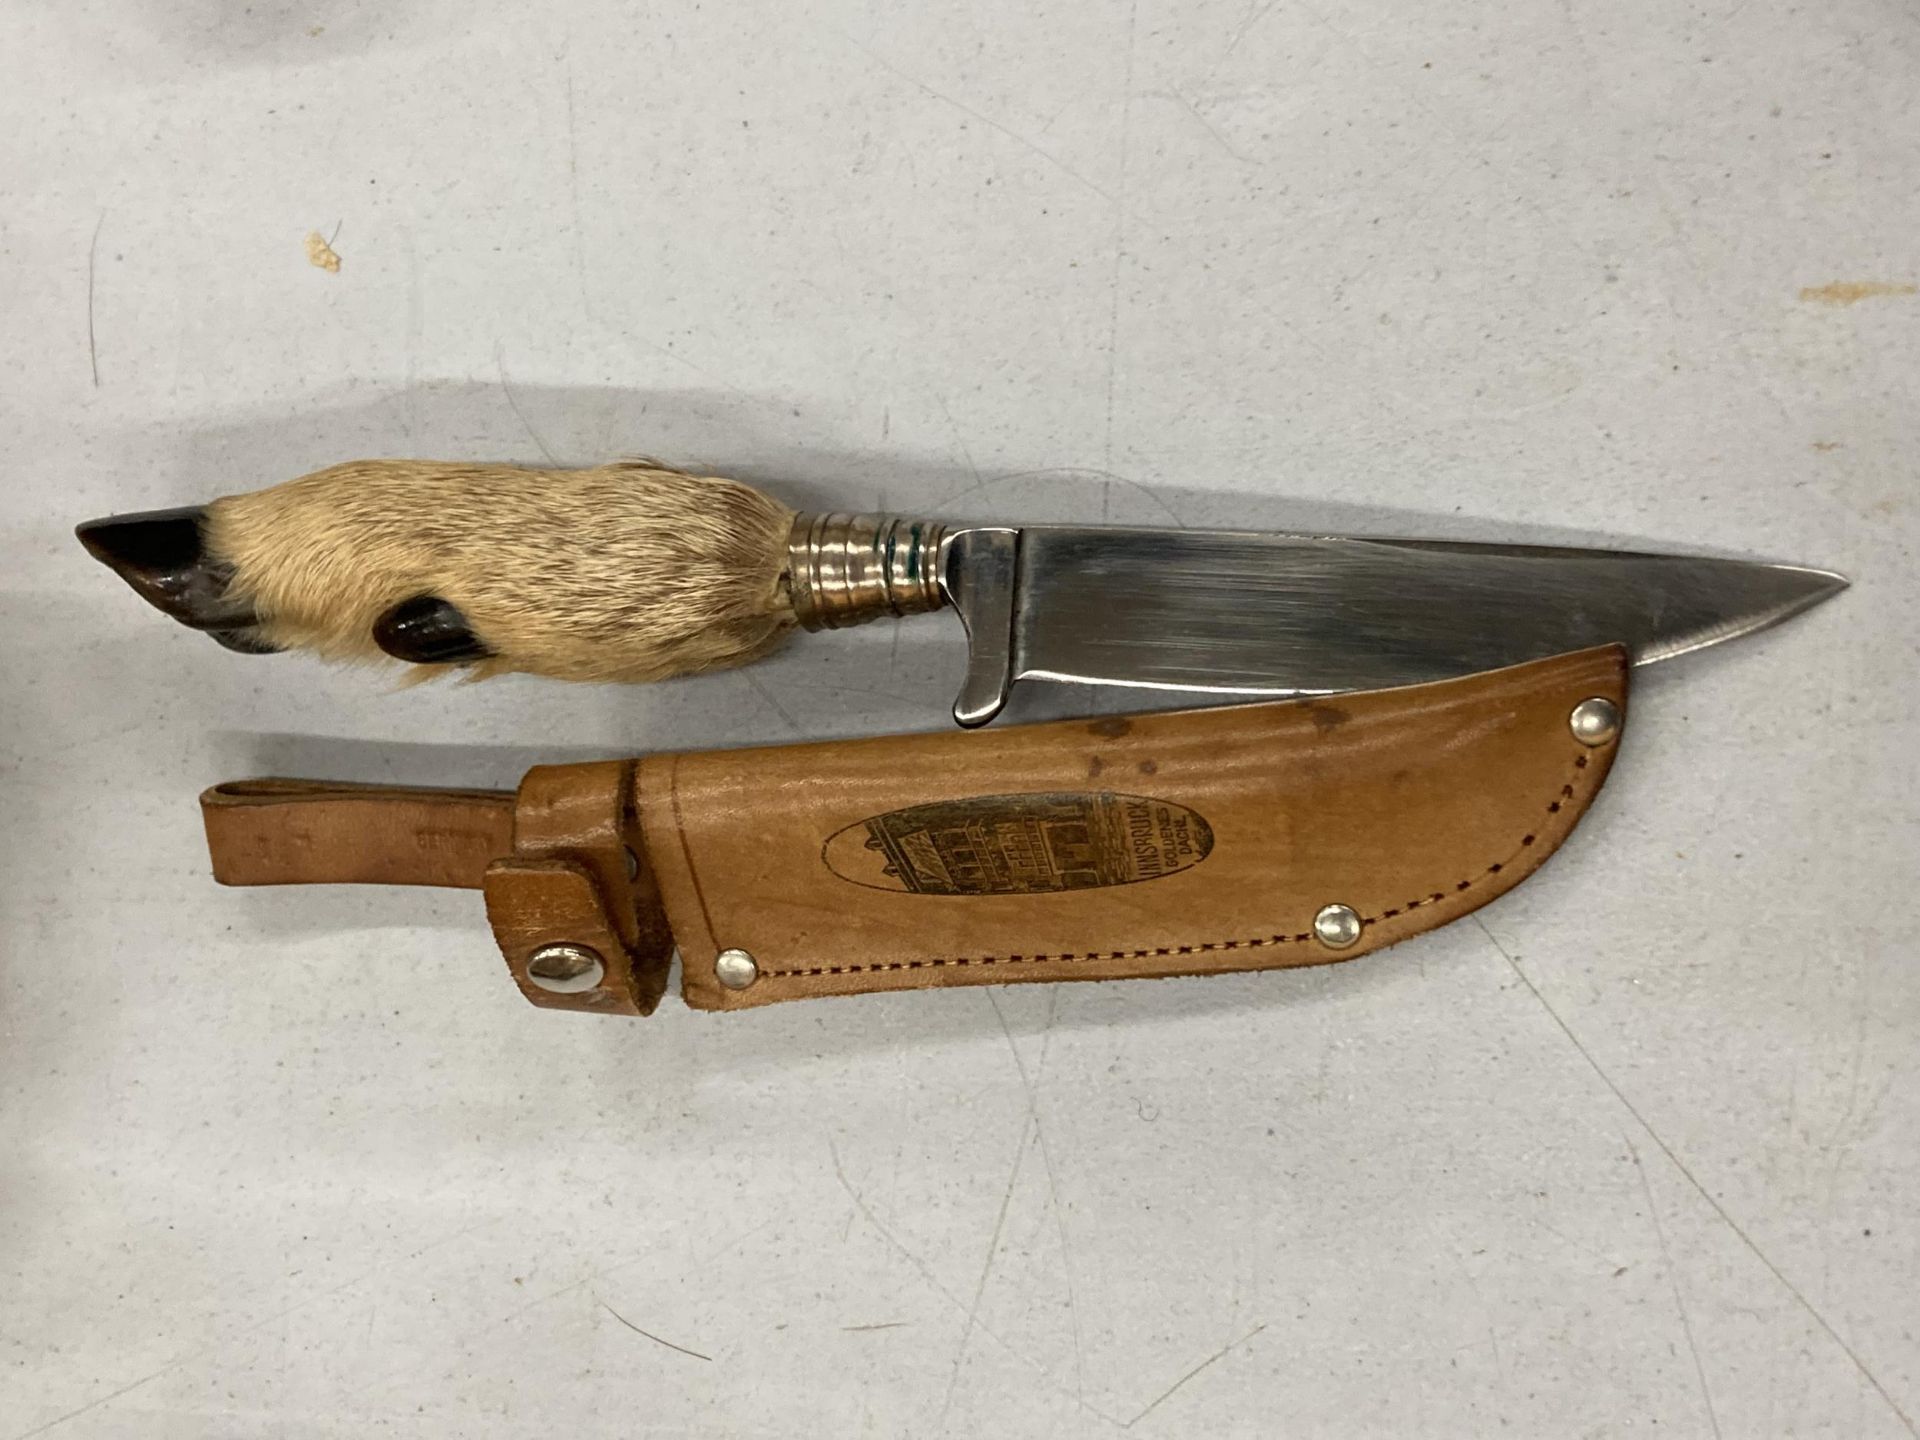 A HUNTING KNIFE WITH A DEER FOOT AHNDLE IN A LEATHER CASE